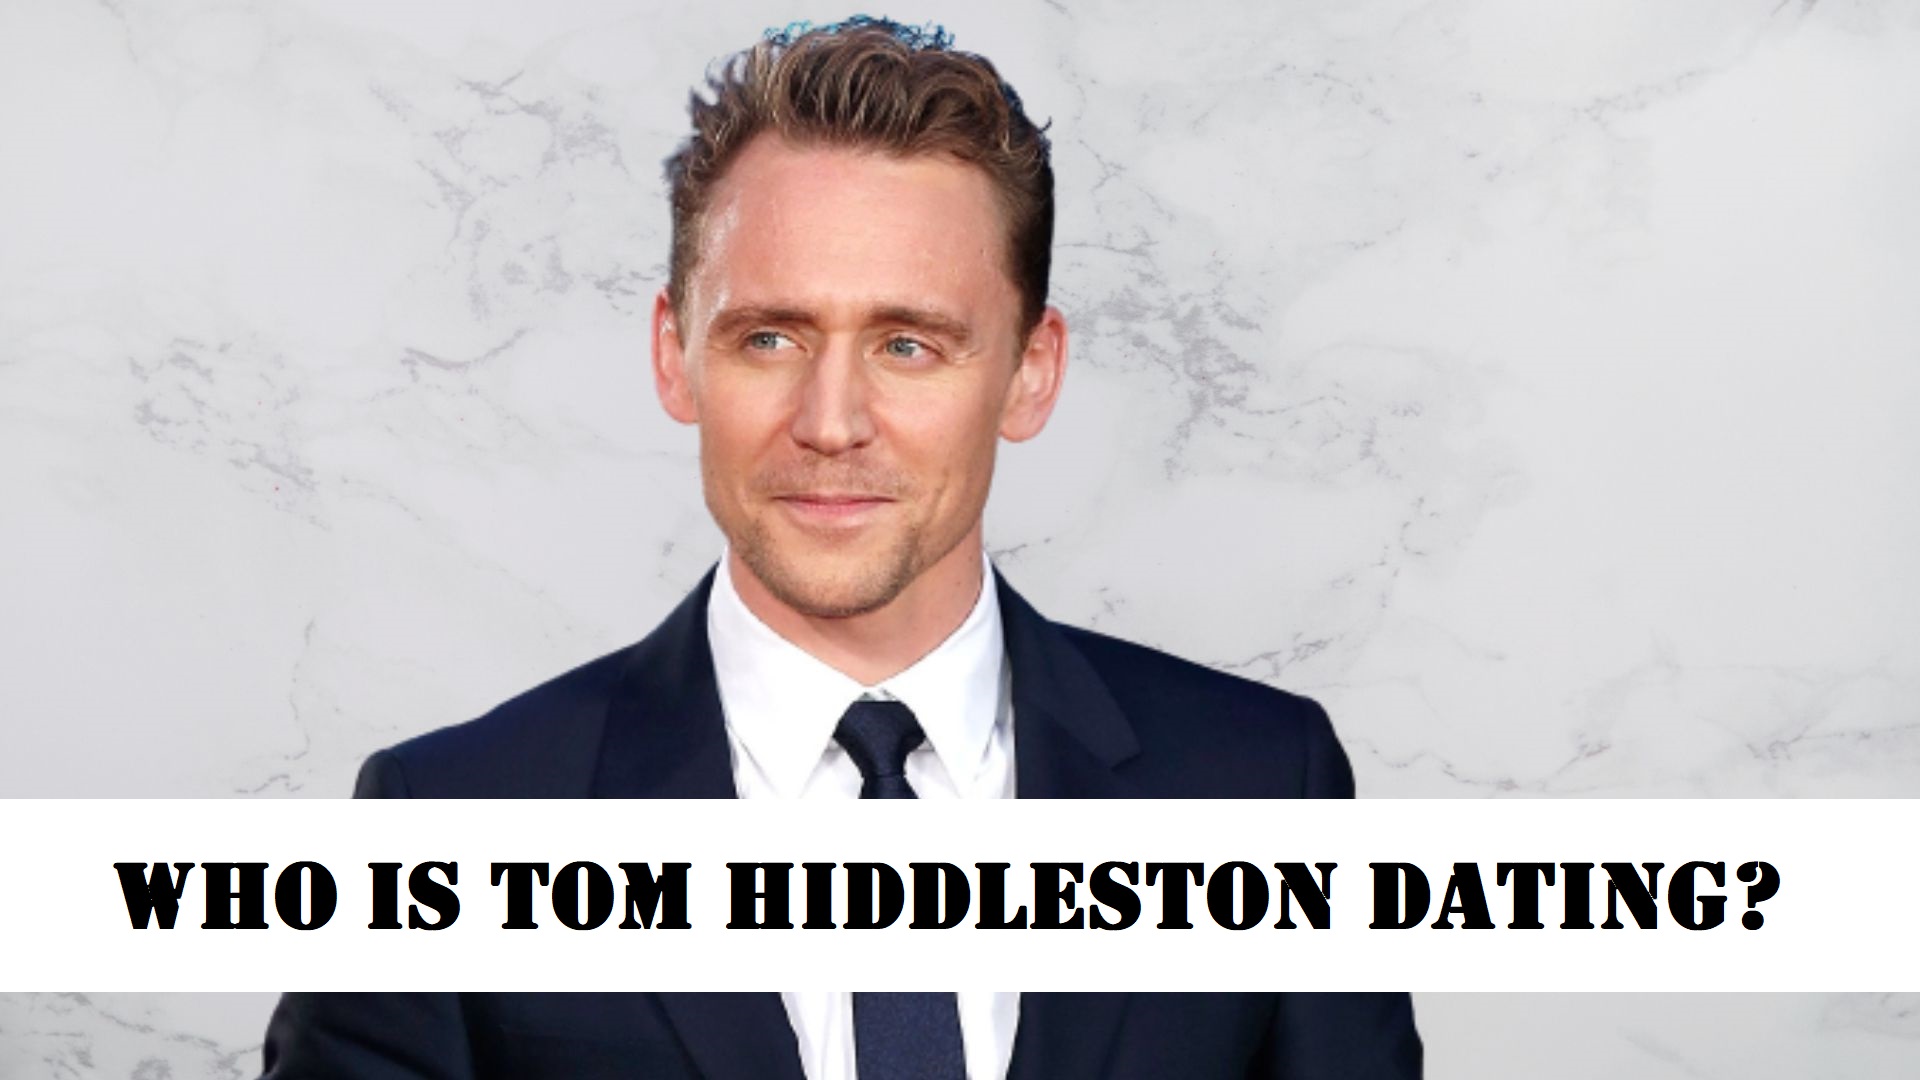 Tom Hiddleston Dating History|Everything About His Ex & Present GF